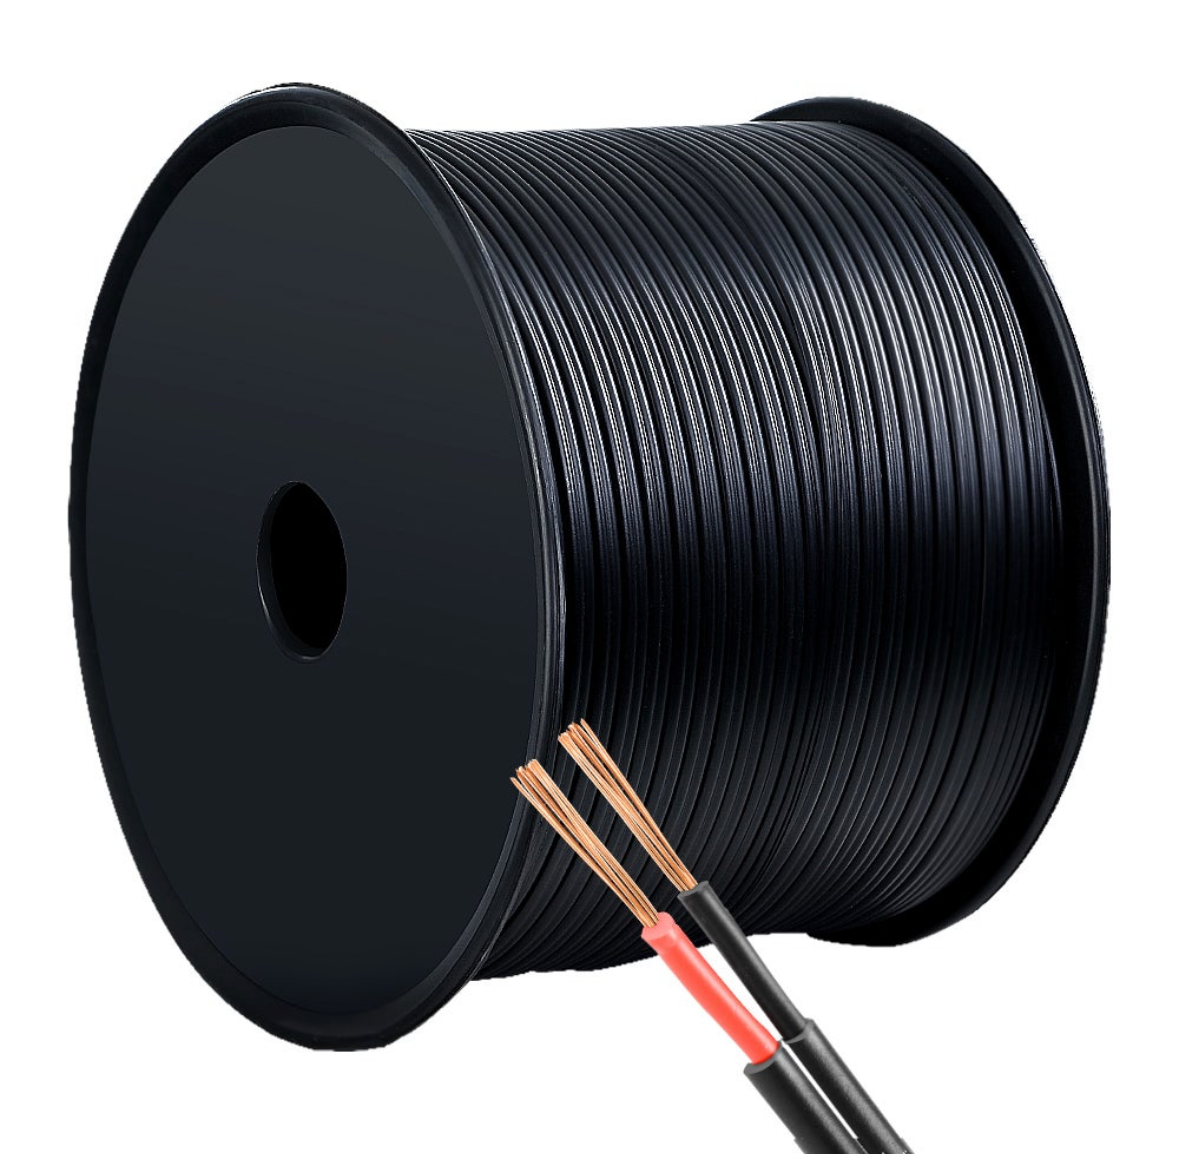 2.5mm * 100m Twin Core Twin Sheath electrical Cable, Red wire positive, Black wire negative. Australian Standards: SAA-certified. Conductor: Oxygen free plain copper wire to AS/NZ 1125. Insulation: V-90 PVC to AS/NZ 3808. Sheath: 5V-90 PVC AS/NZ 3808.  Voltage: up to 450V AC/DC. AMP: 11A Core No.: 2. Strand Diameter: 7/0.32mm.